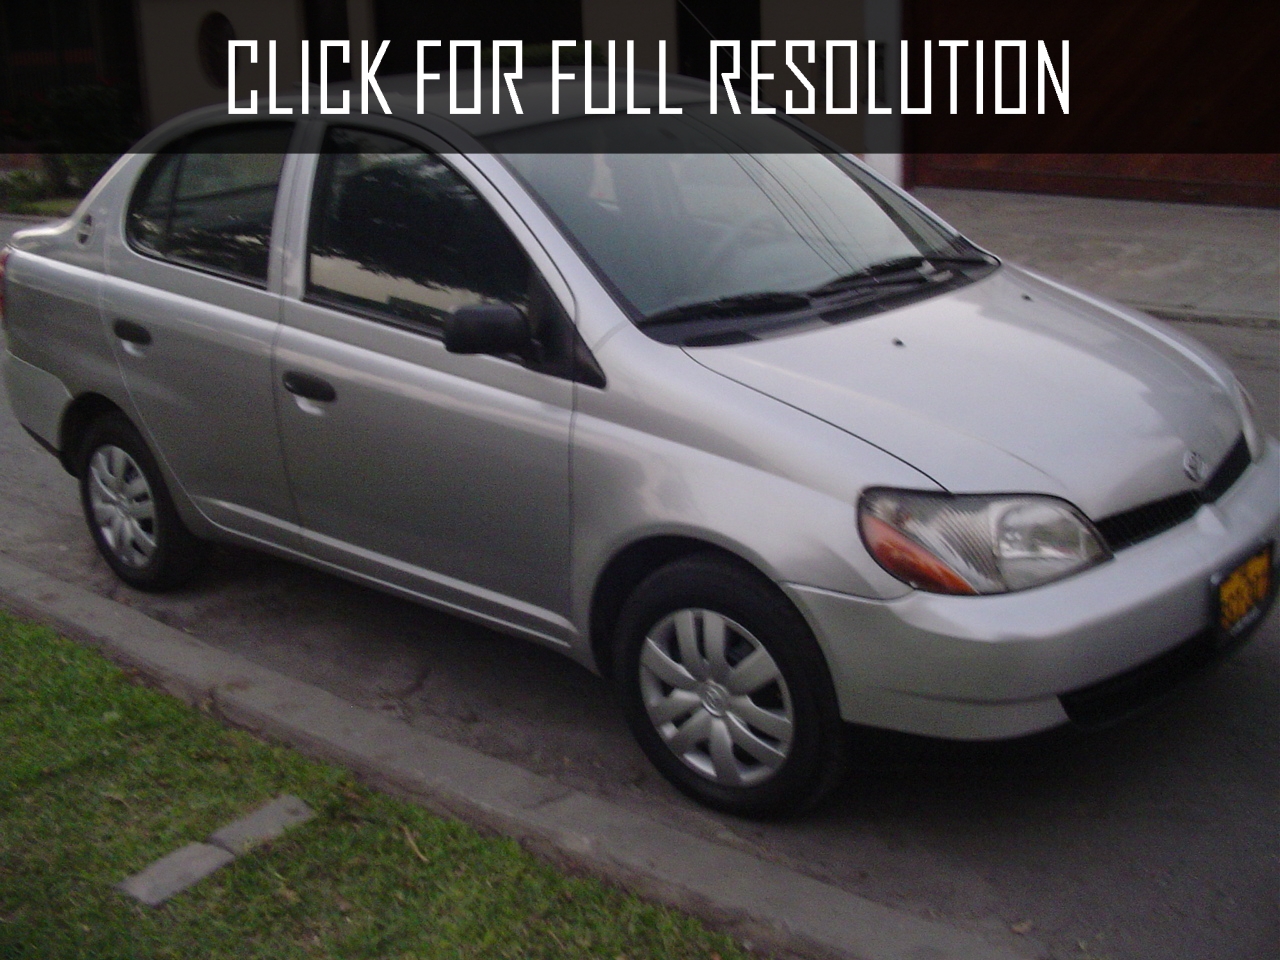 2000 Toyota Yaris news, reviews, msrp, ratings with